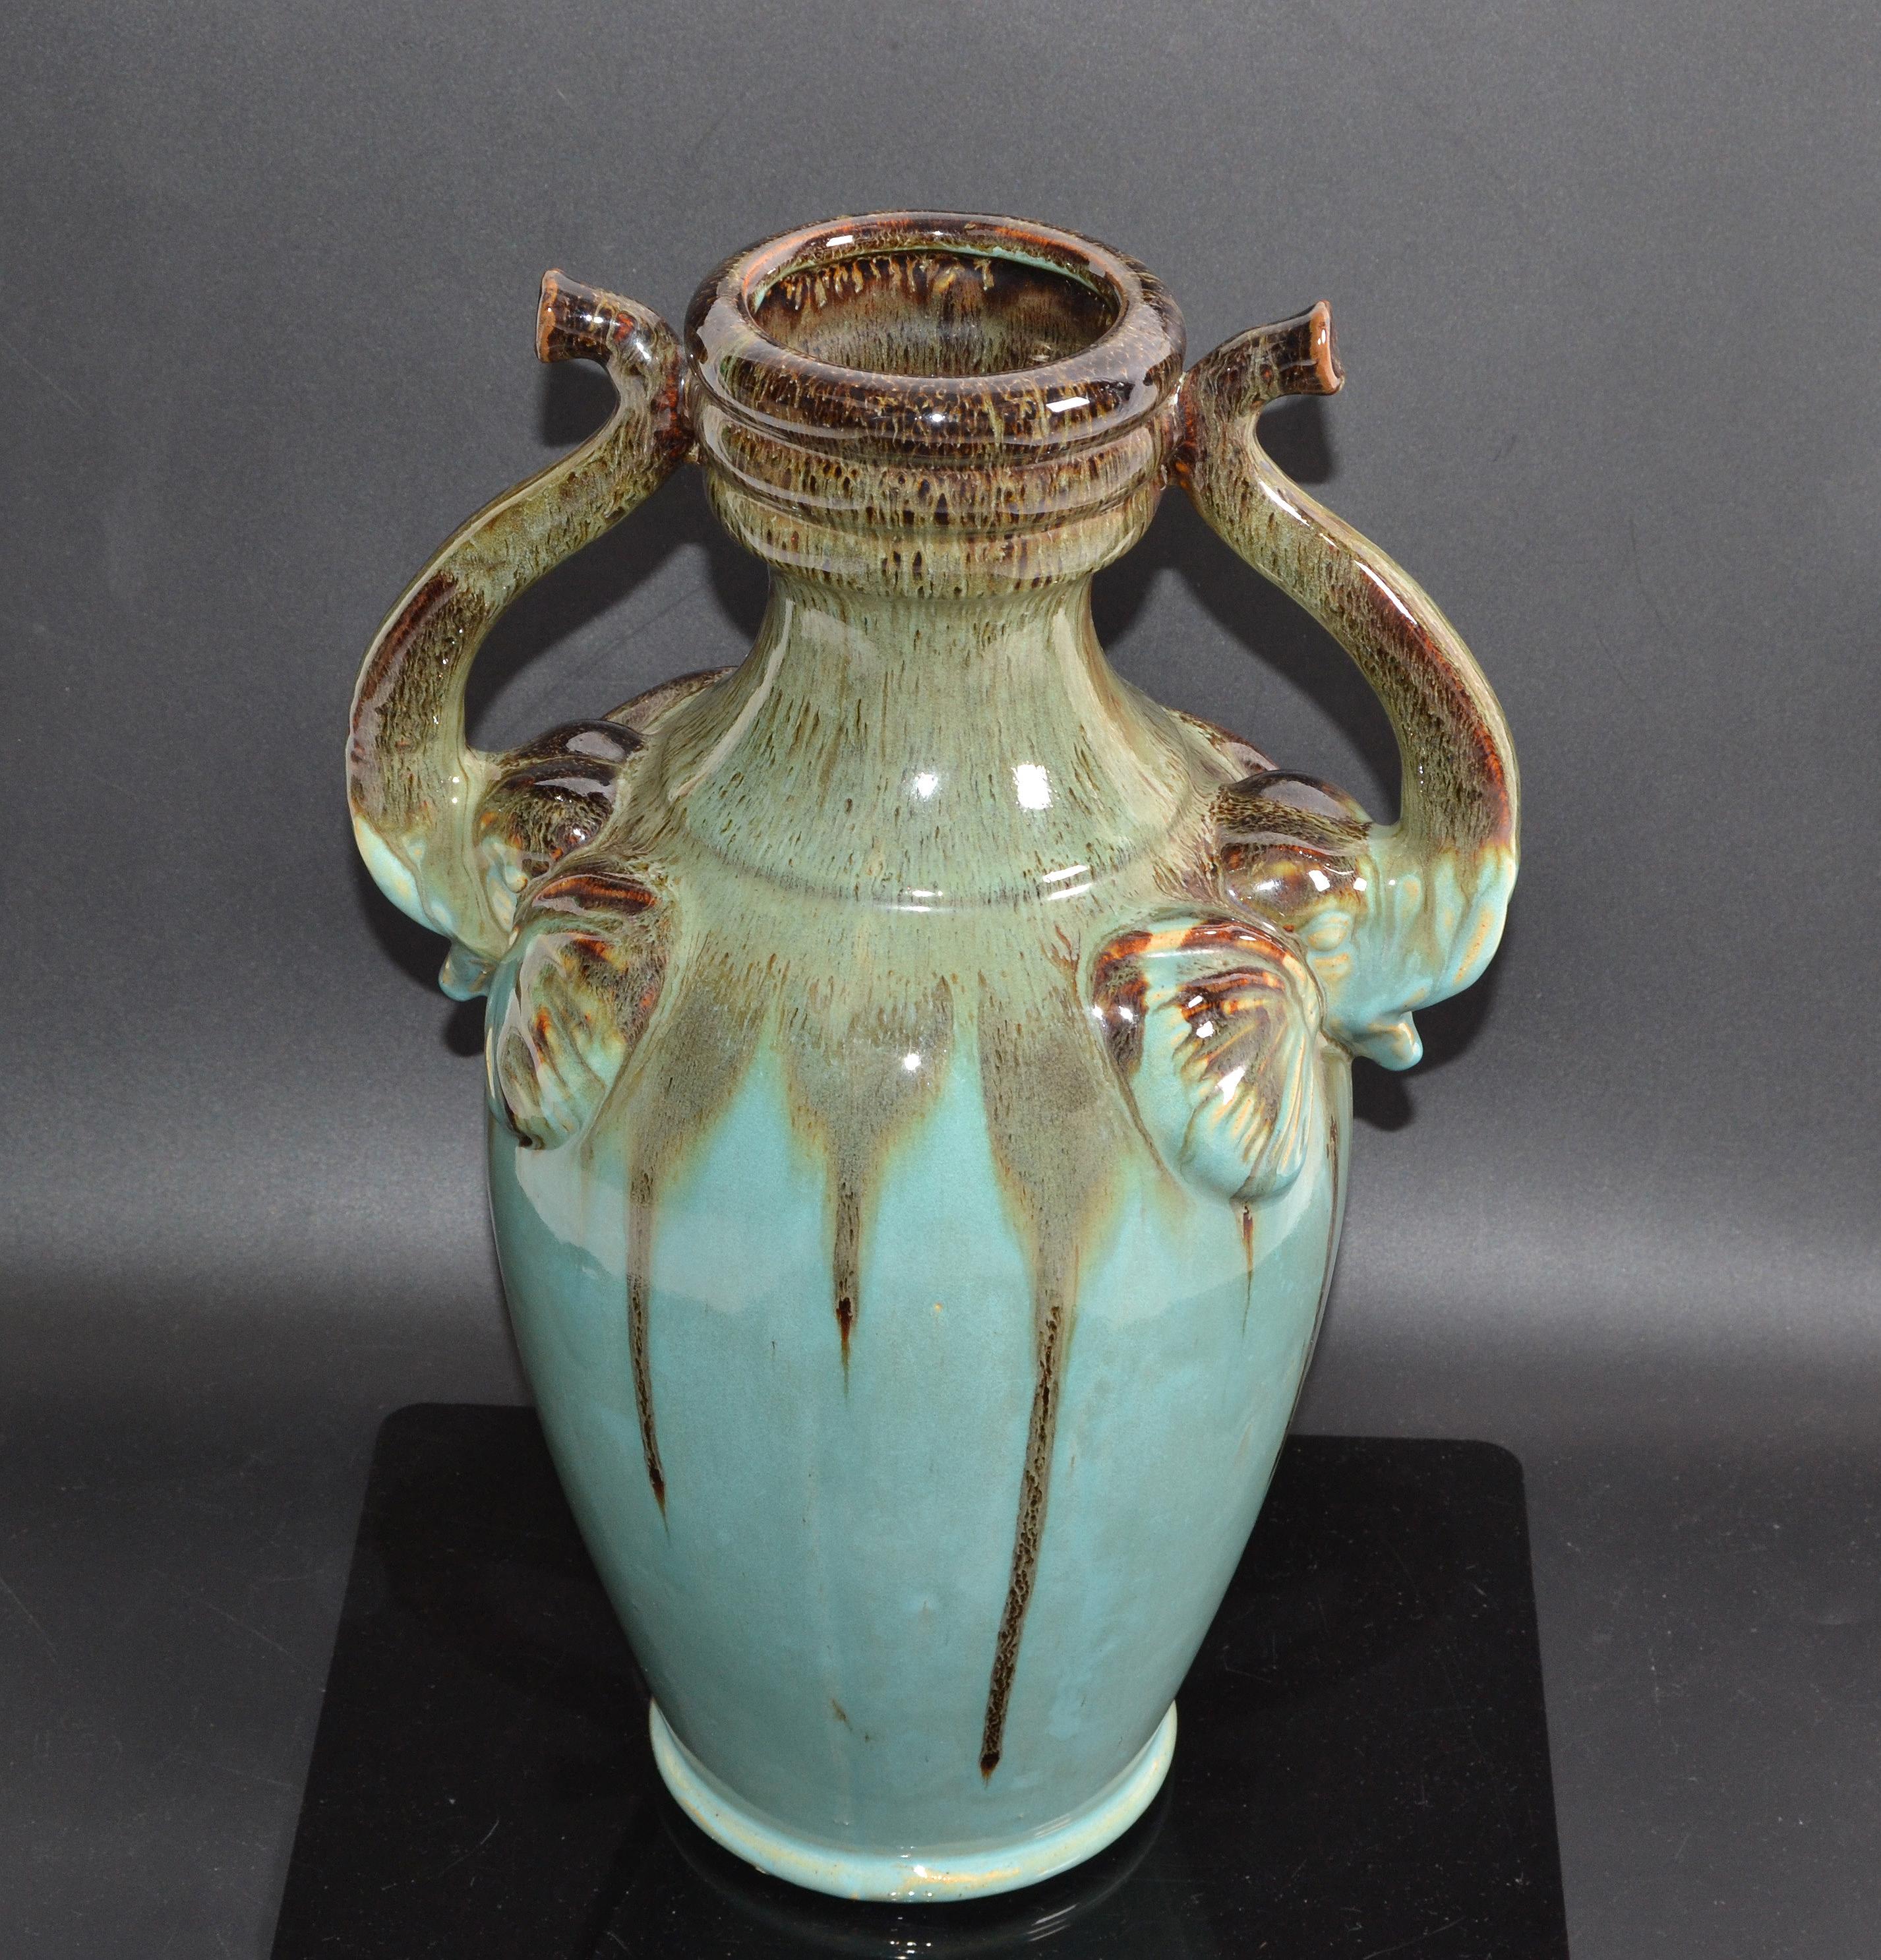 Marked glaze ceramic decorative urn, vase in terracotta and elephant handles.
Finished in a beautiful warm Turquoise and Brown Hue with smooth Textures.
Marked at the Base E and signed.